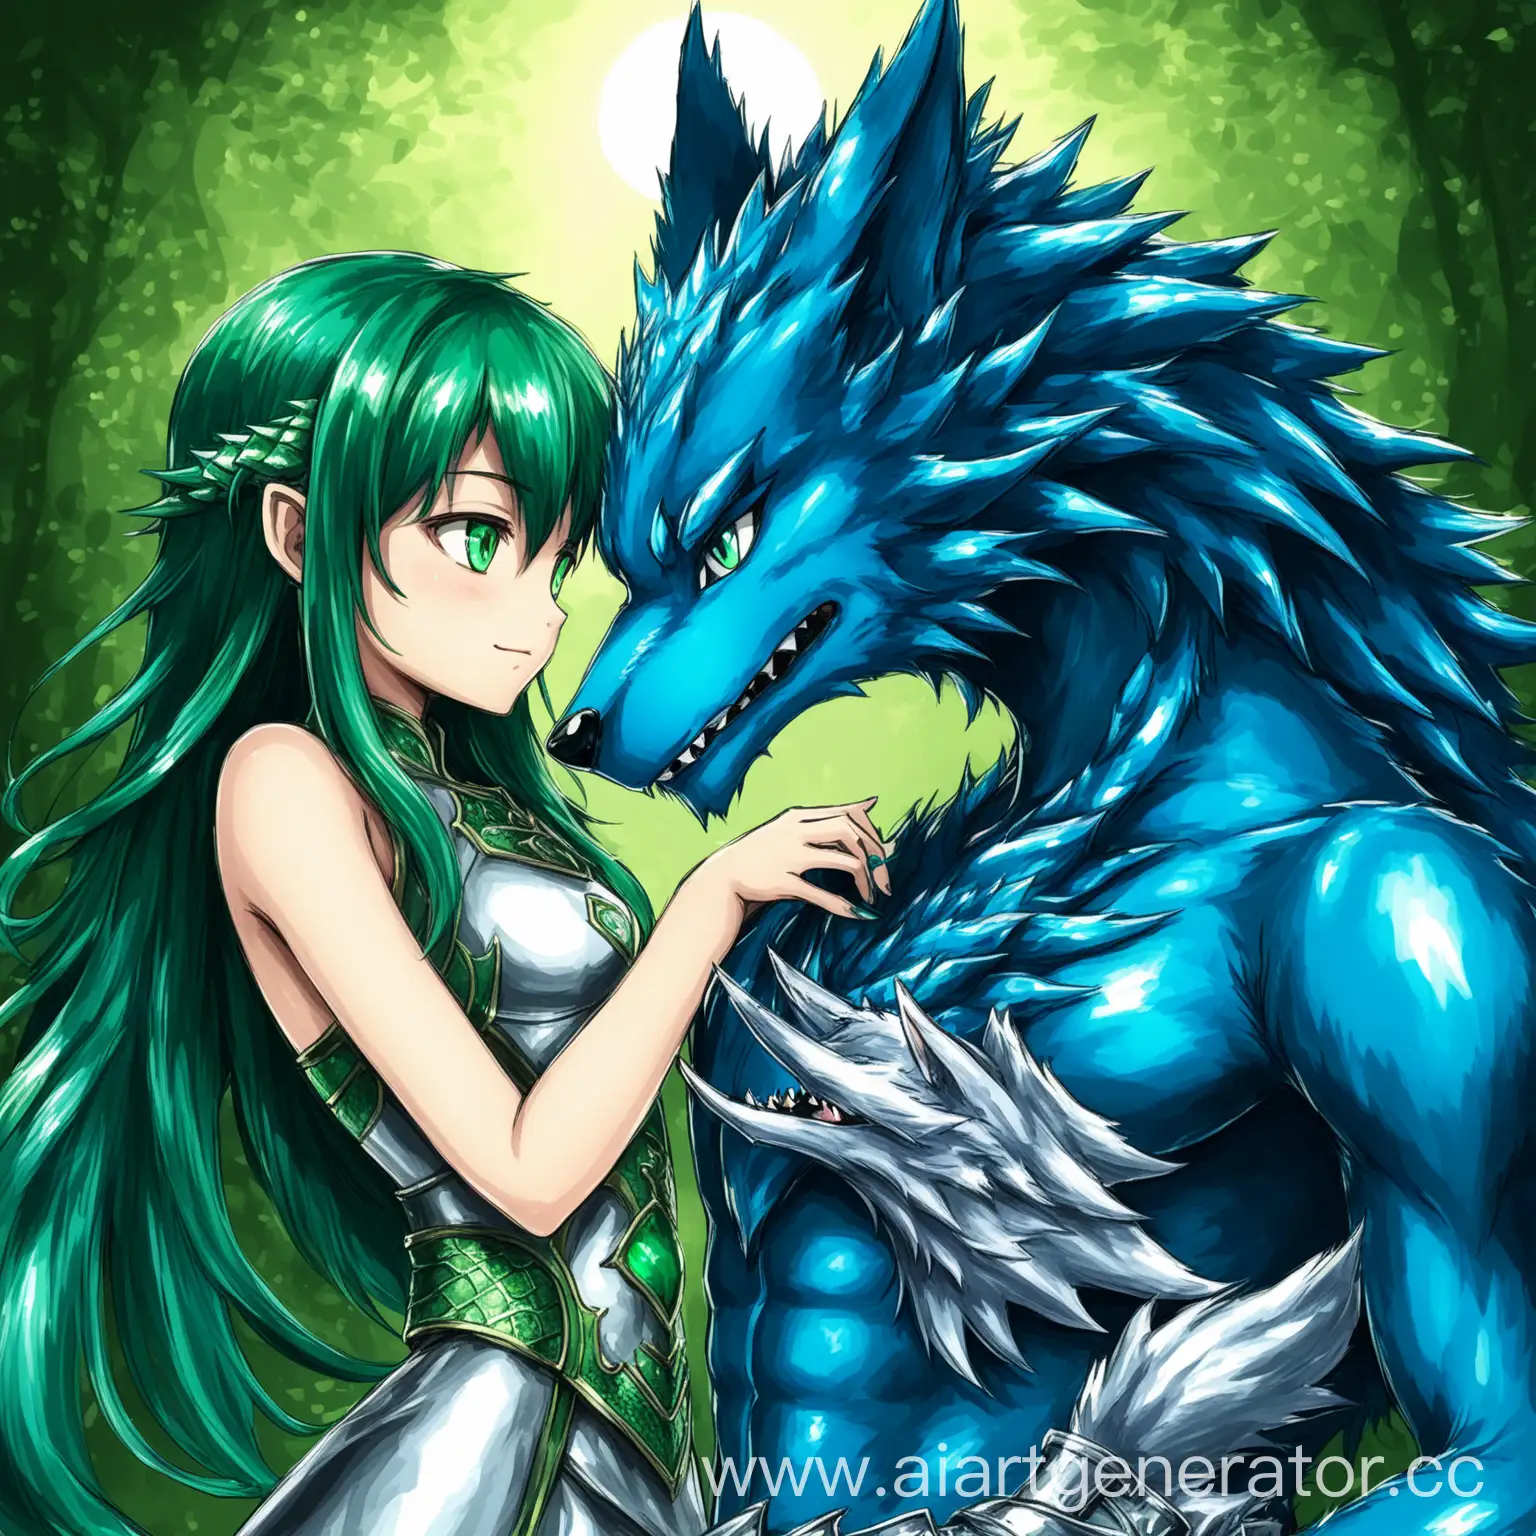 Metallic-Green-Dragon-Boy-and-Blue-Wolf-Girl-in-a-Loving-Embrace